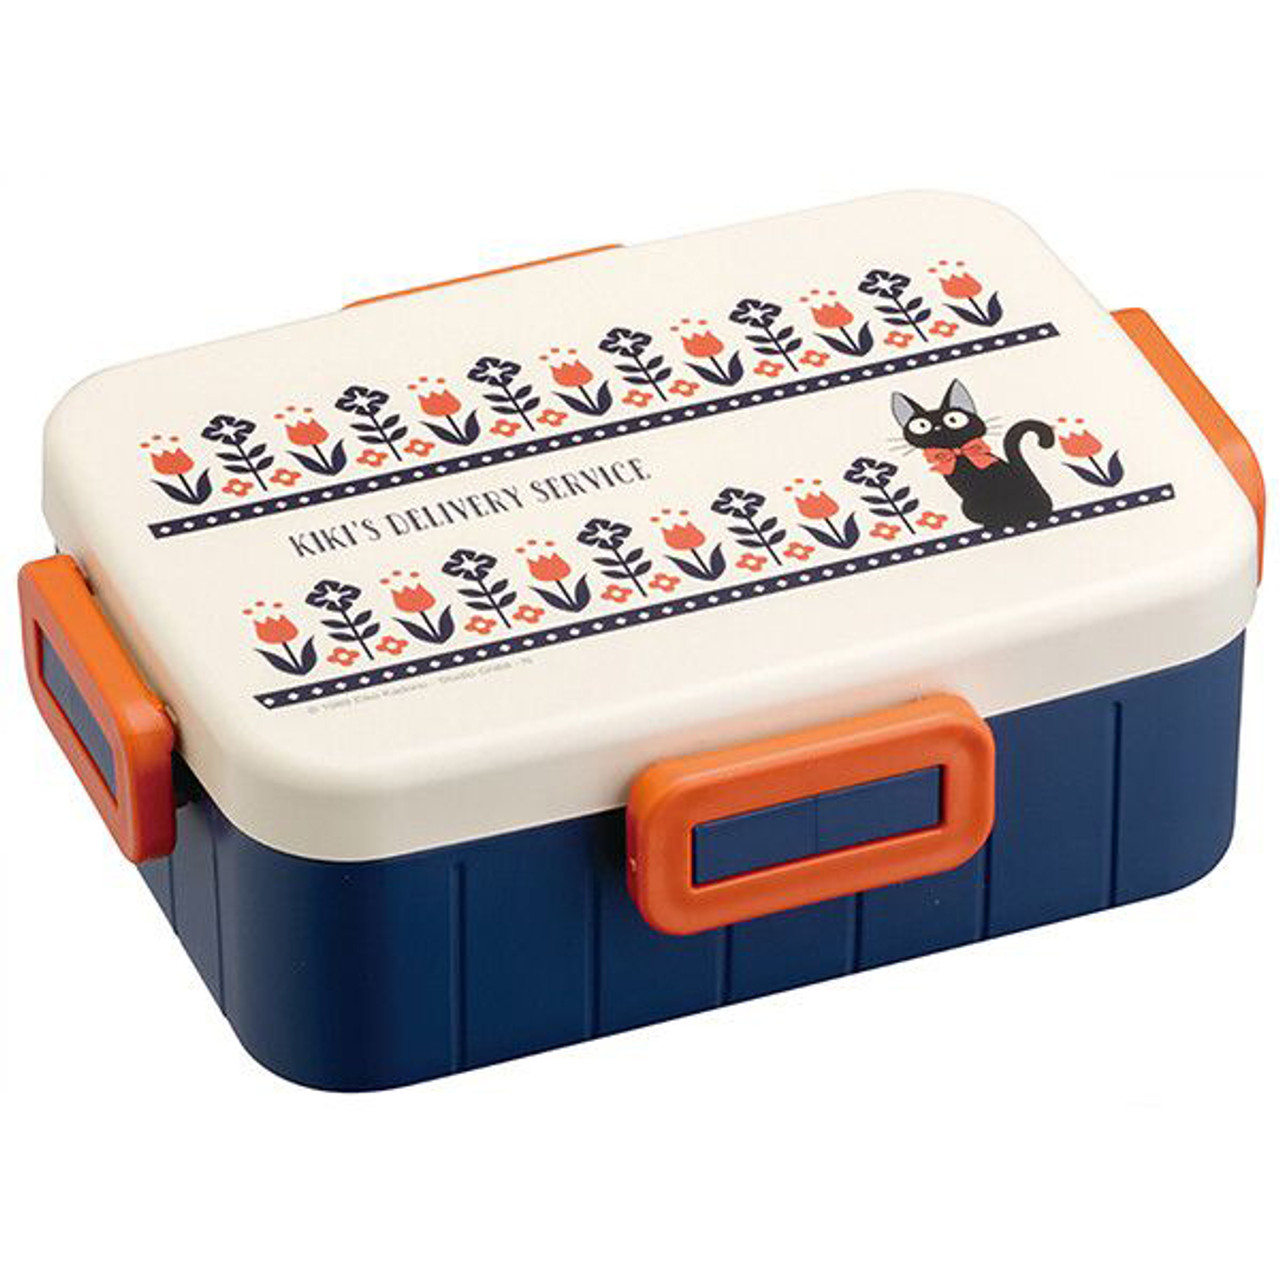 https://cdn11.bigcommerce.com/s-ygopcimc/images/stencil/1280x1280/products/991/8700/SK-GHB-1521_Kikis_Delivery_Service_Bento_Lunch_Box_21.98oz_650ml_Modern_01__14240.1676407101.jpg?c=2?imbypass=on